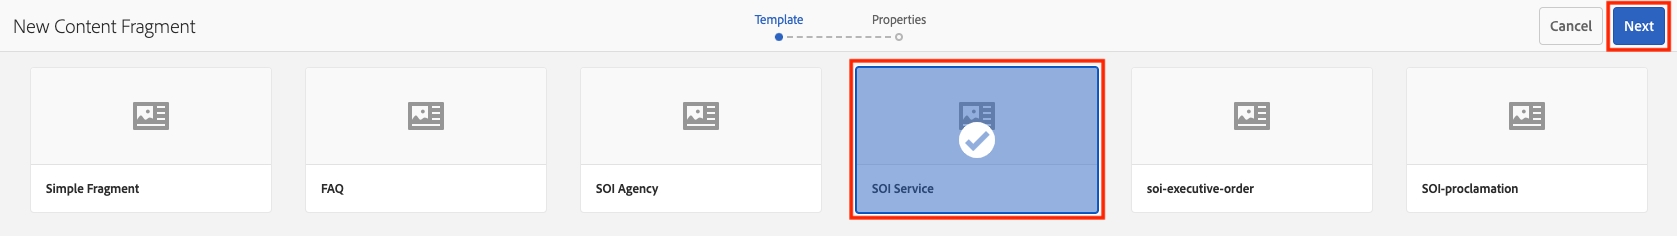 select soi service content fragment in AEM